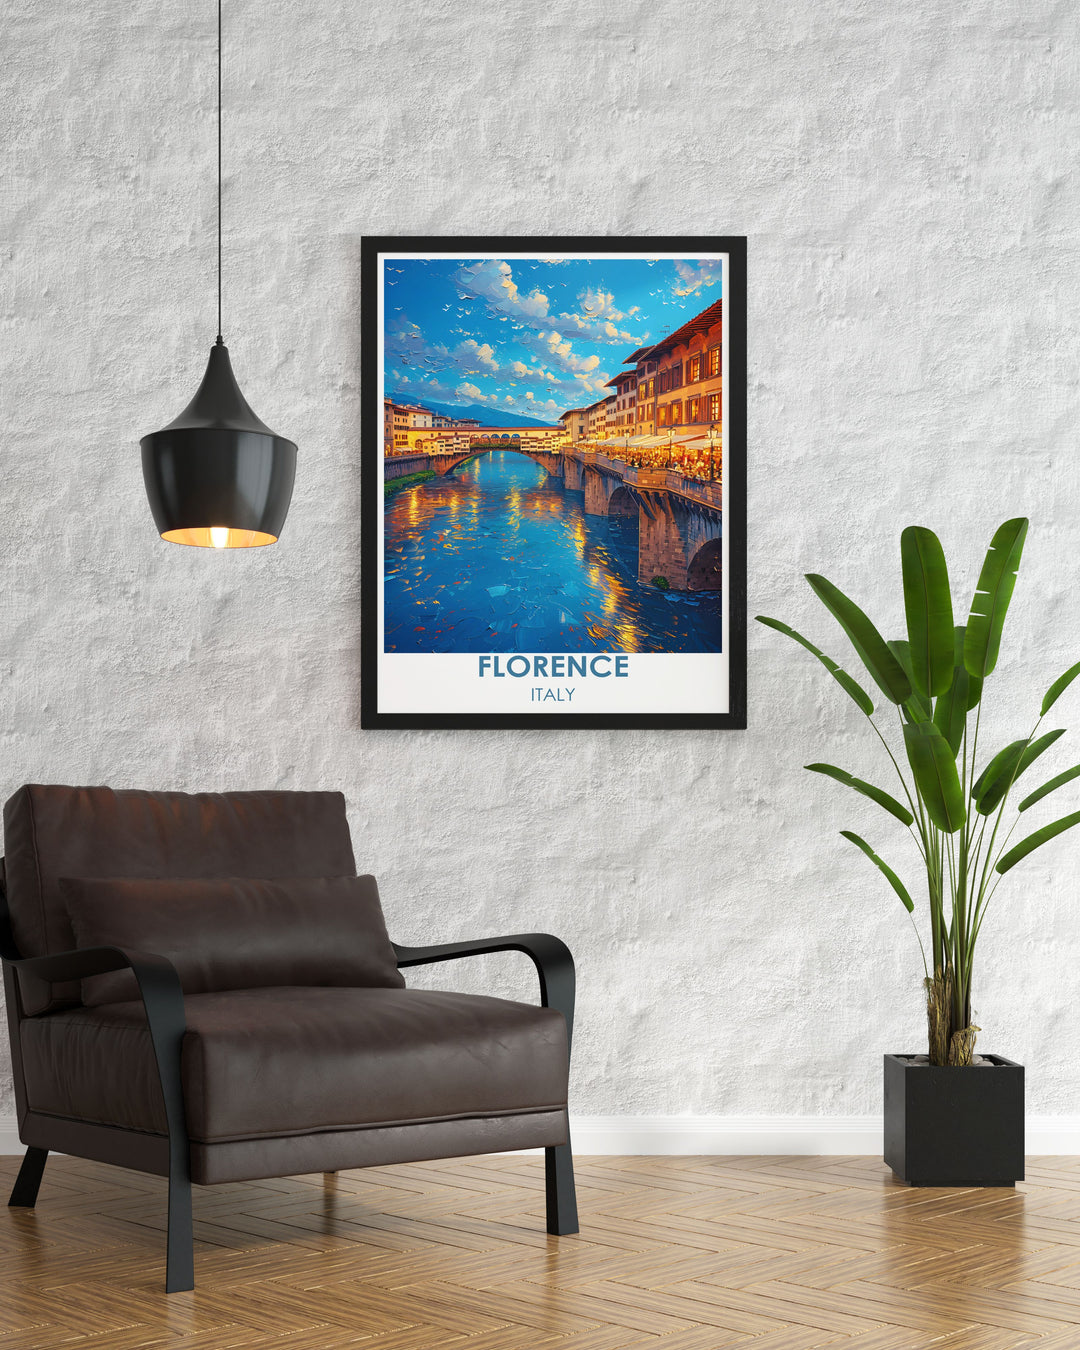 Vintage poster highlighting the Ponte Vecchio, showcasing its timeless beauty and scenic surroundings.